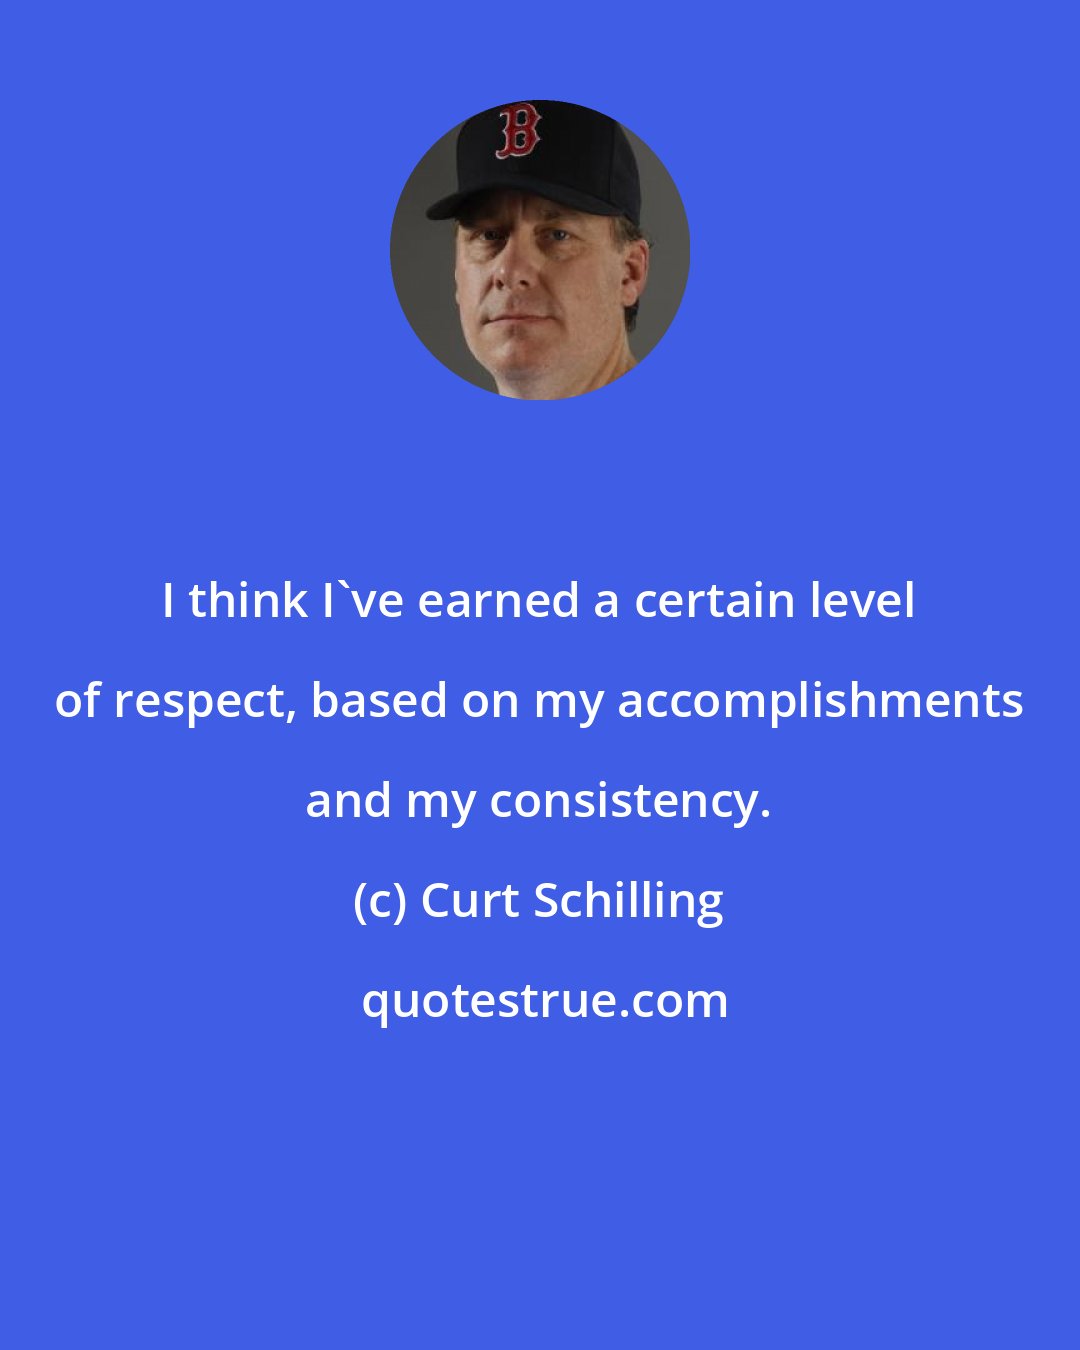 Curt Schilling: I think I've earned a certain level of respect, based on my accomplishments and my consistency.